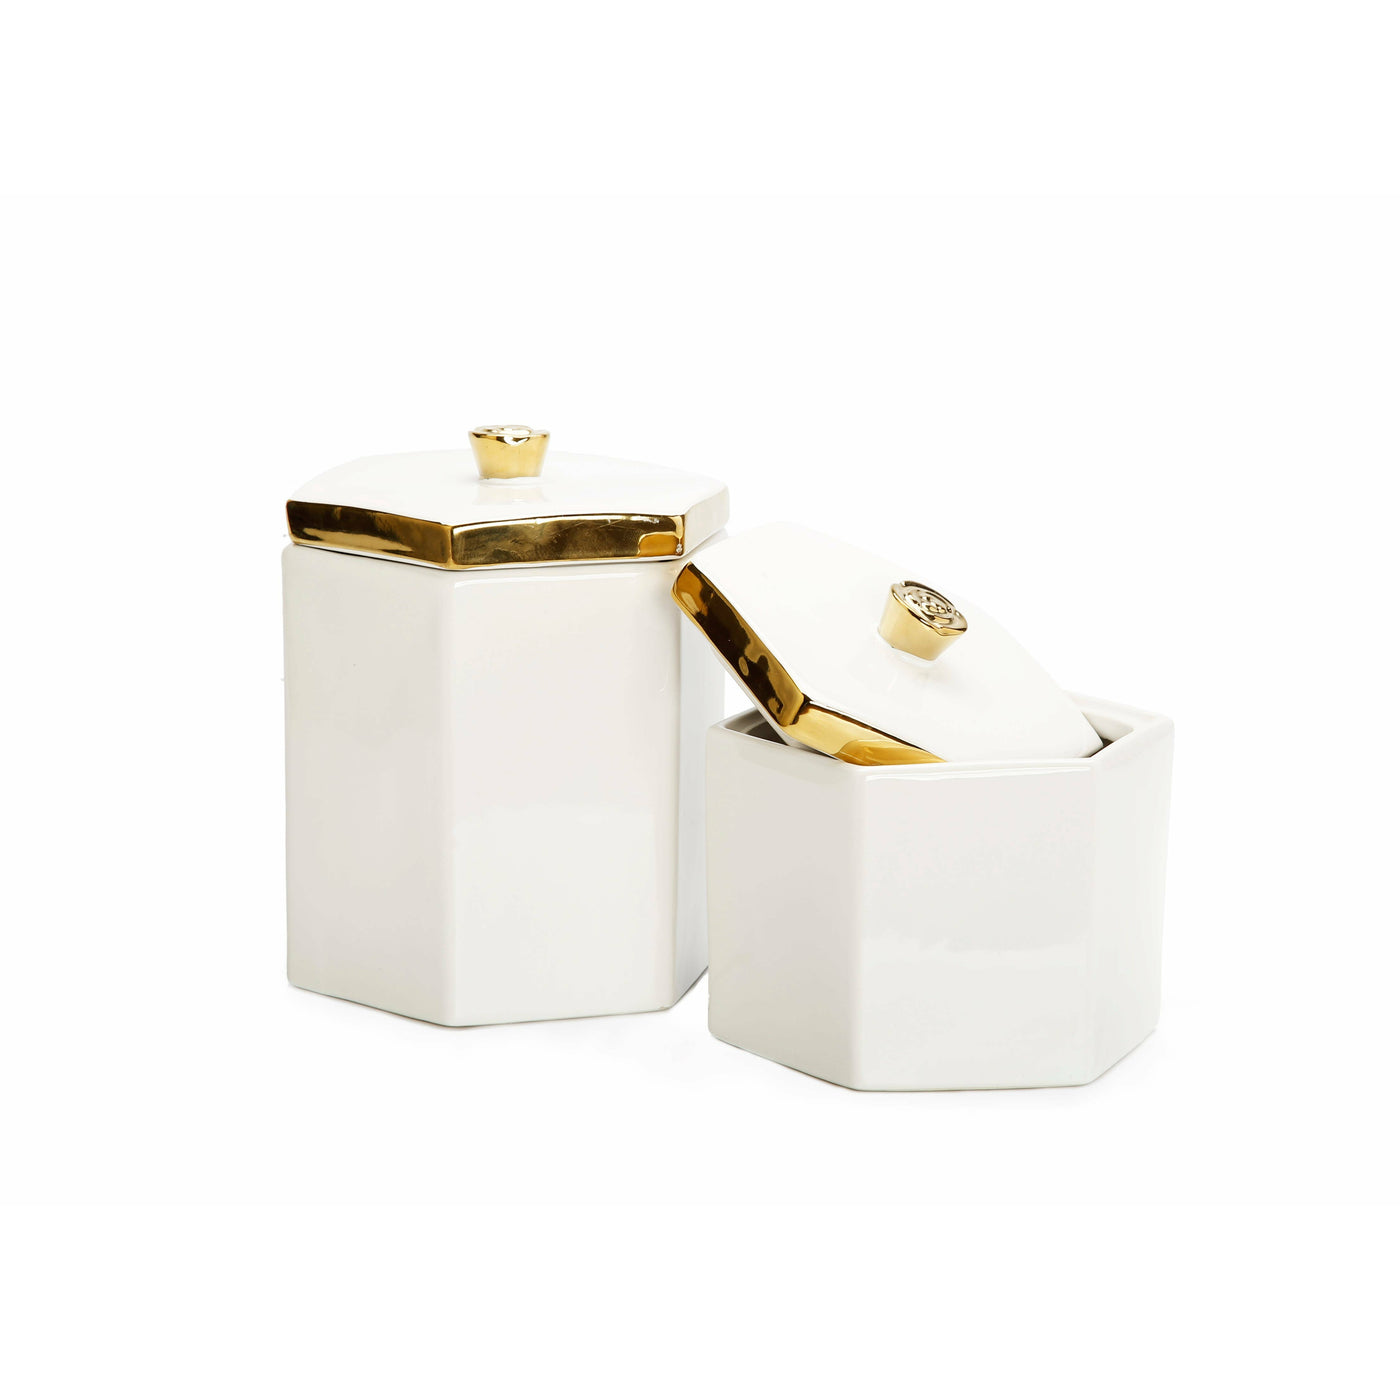 White Hexagon Shaped Box with Gold Flower Knob on Cover - Tall